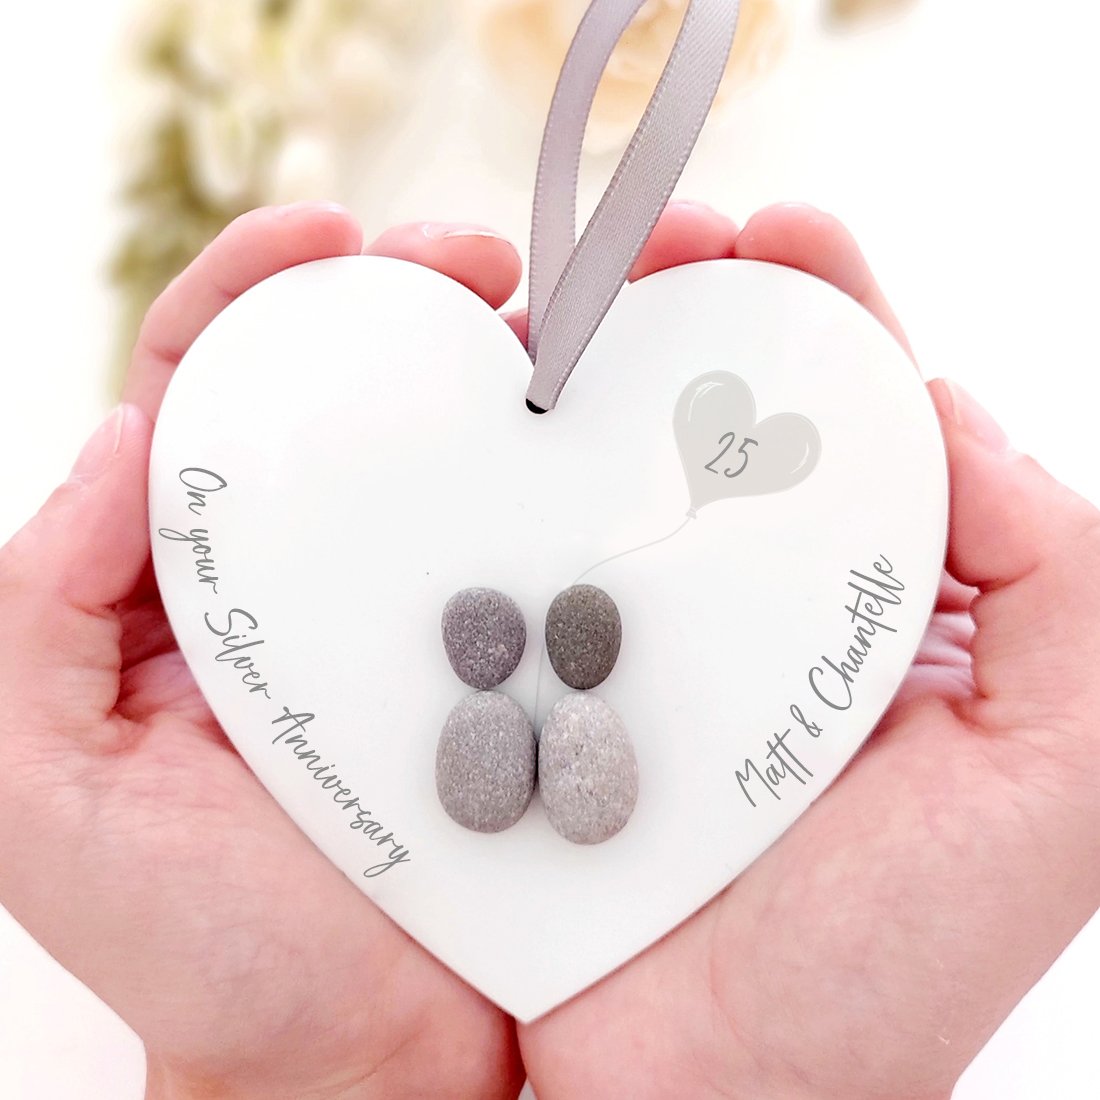 Redefine your love with these Anniversary personalised gifts